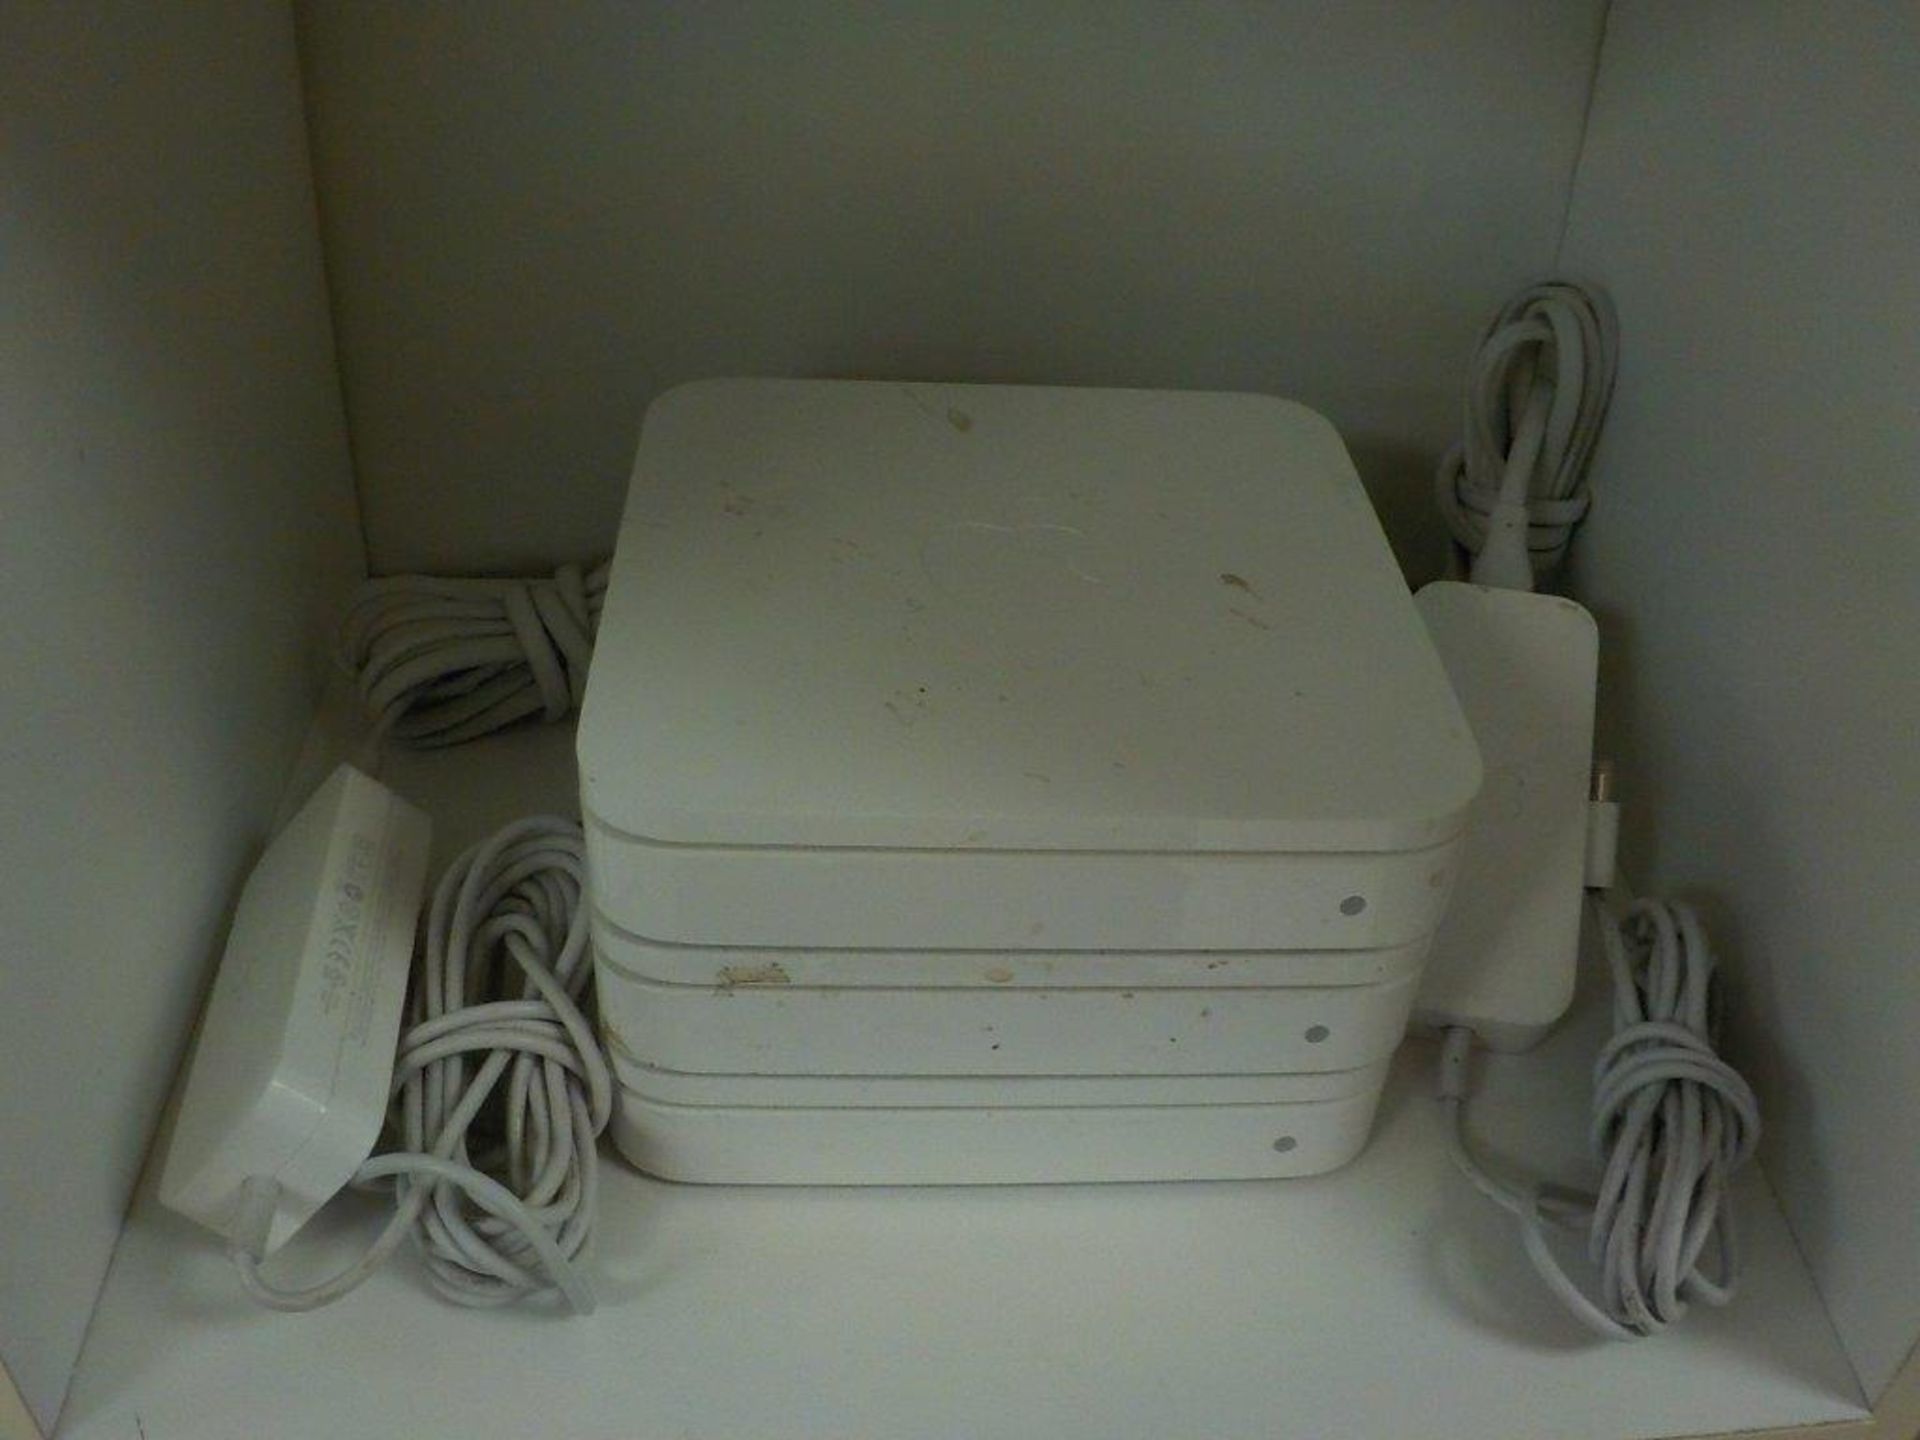 APPLE AIRPORT EXTREME - Image 2 of 2